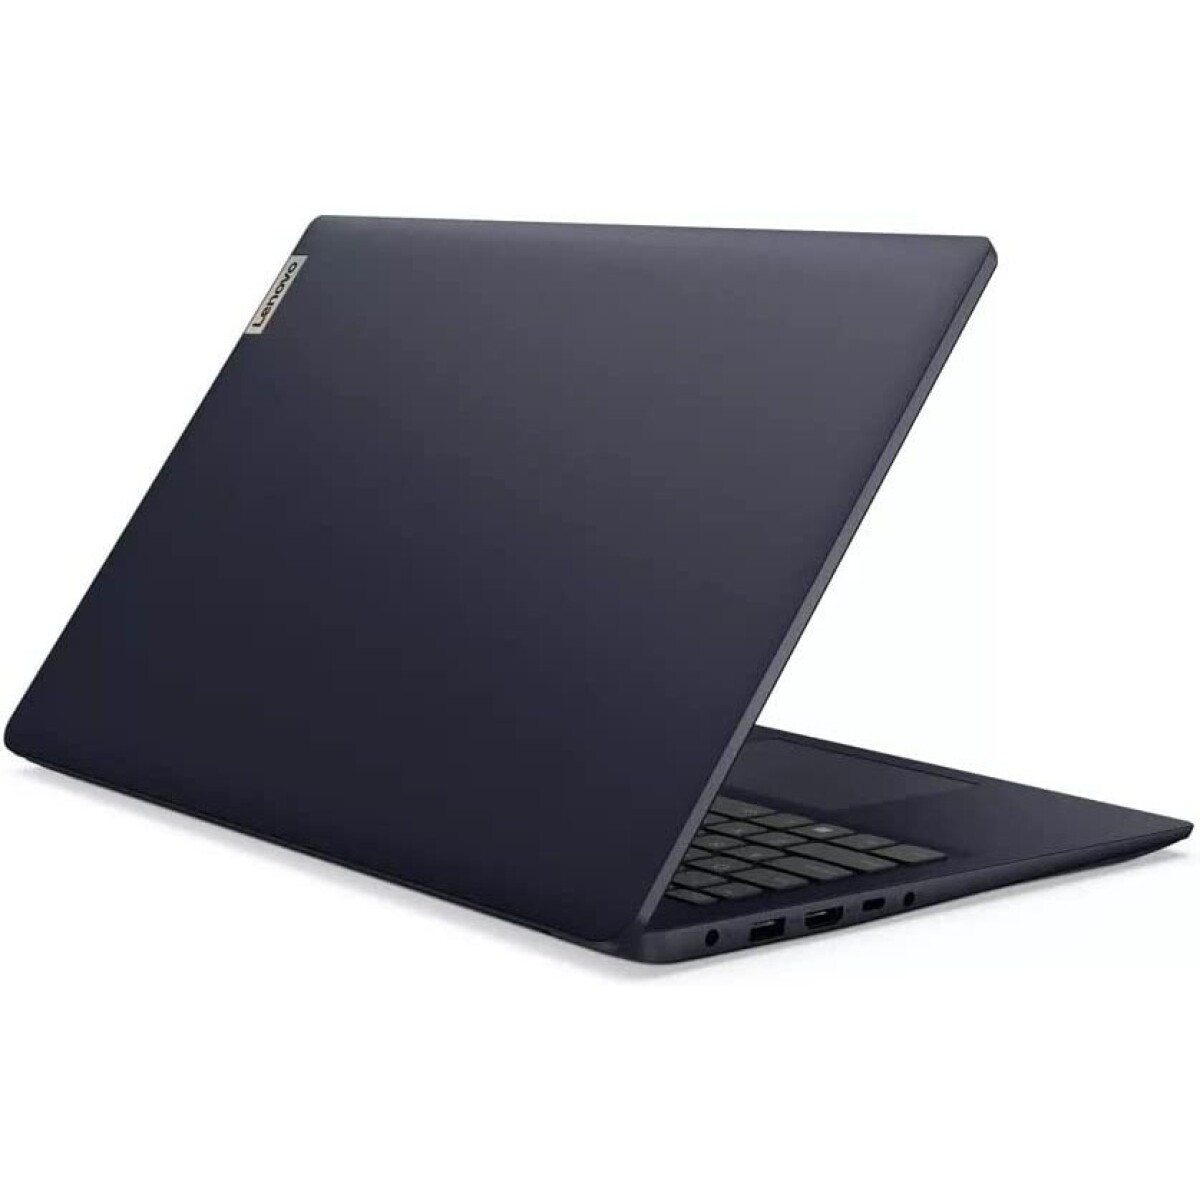 Notebook Lenovo Core I3 4.4GHZ, 8GB, 512GB Ssd, 15.6" Fhd 